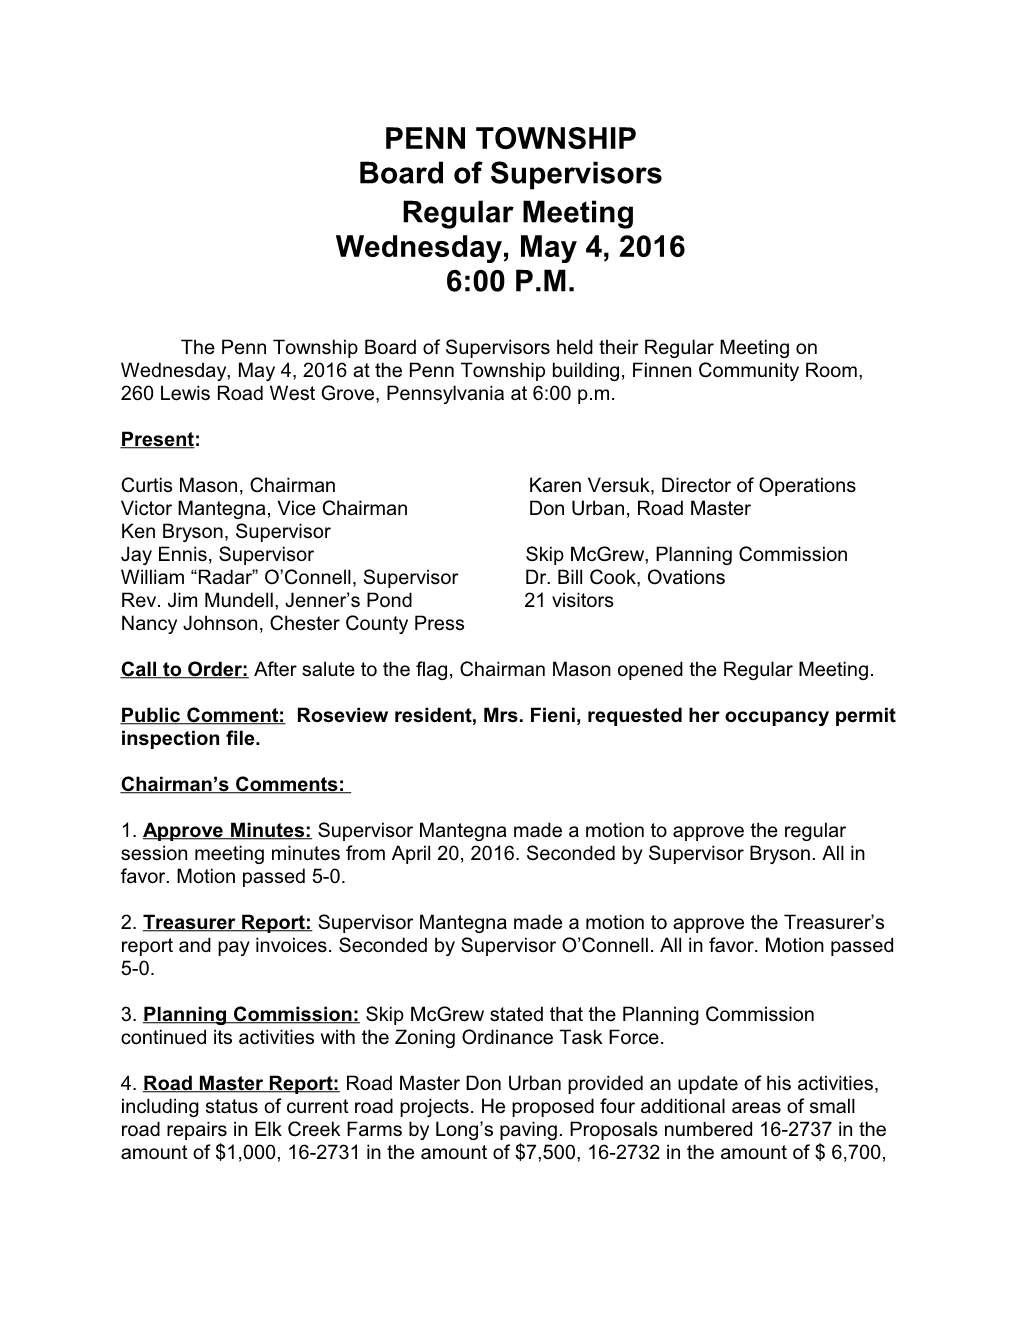 Board of Supervisors s3